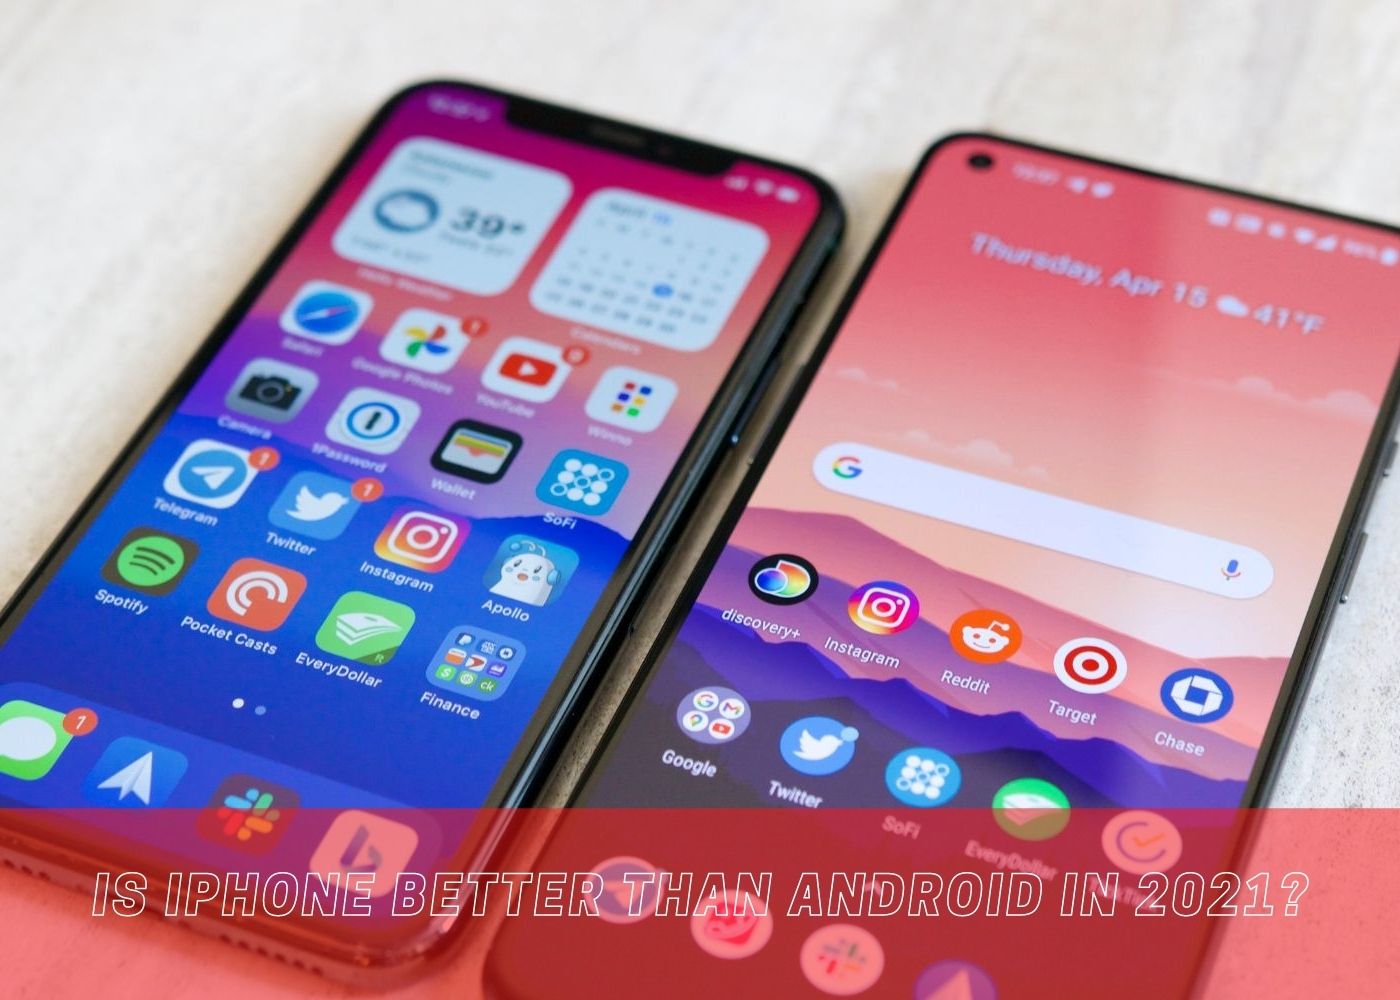 Is iPhone better than android in 2021?